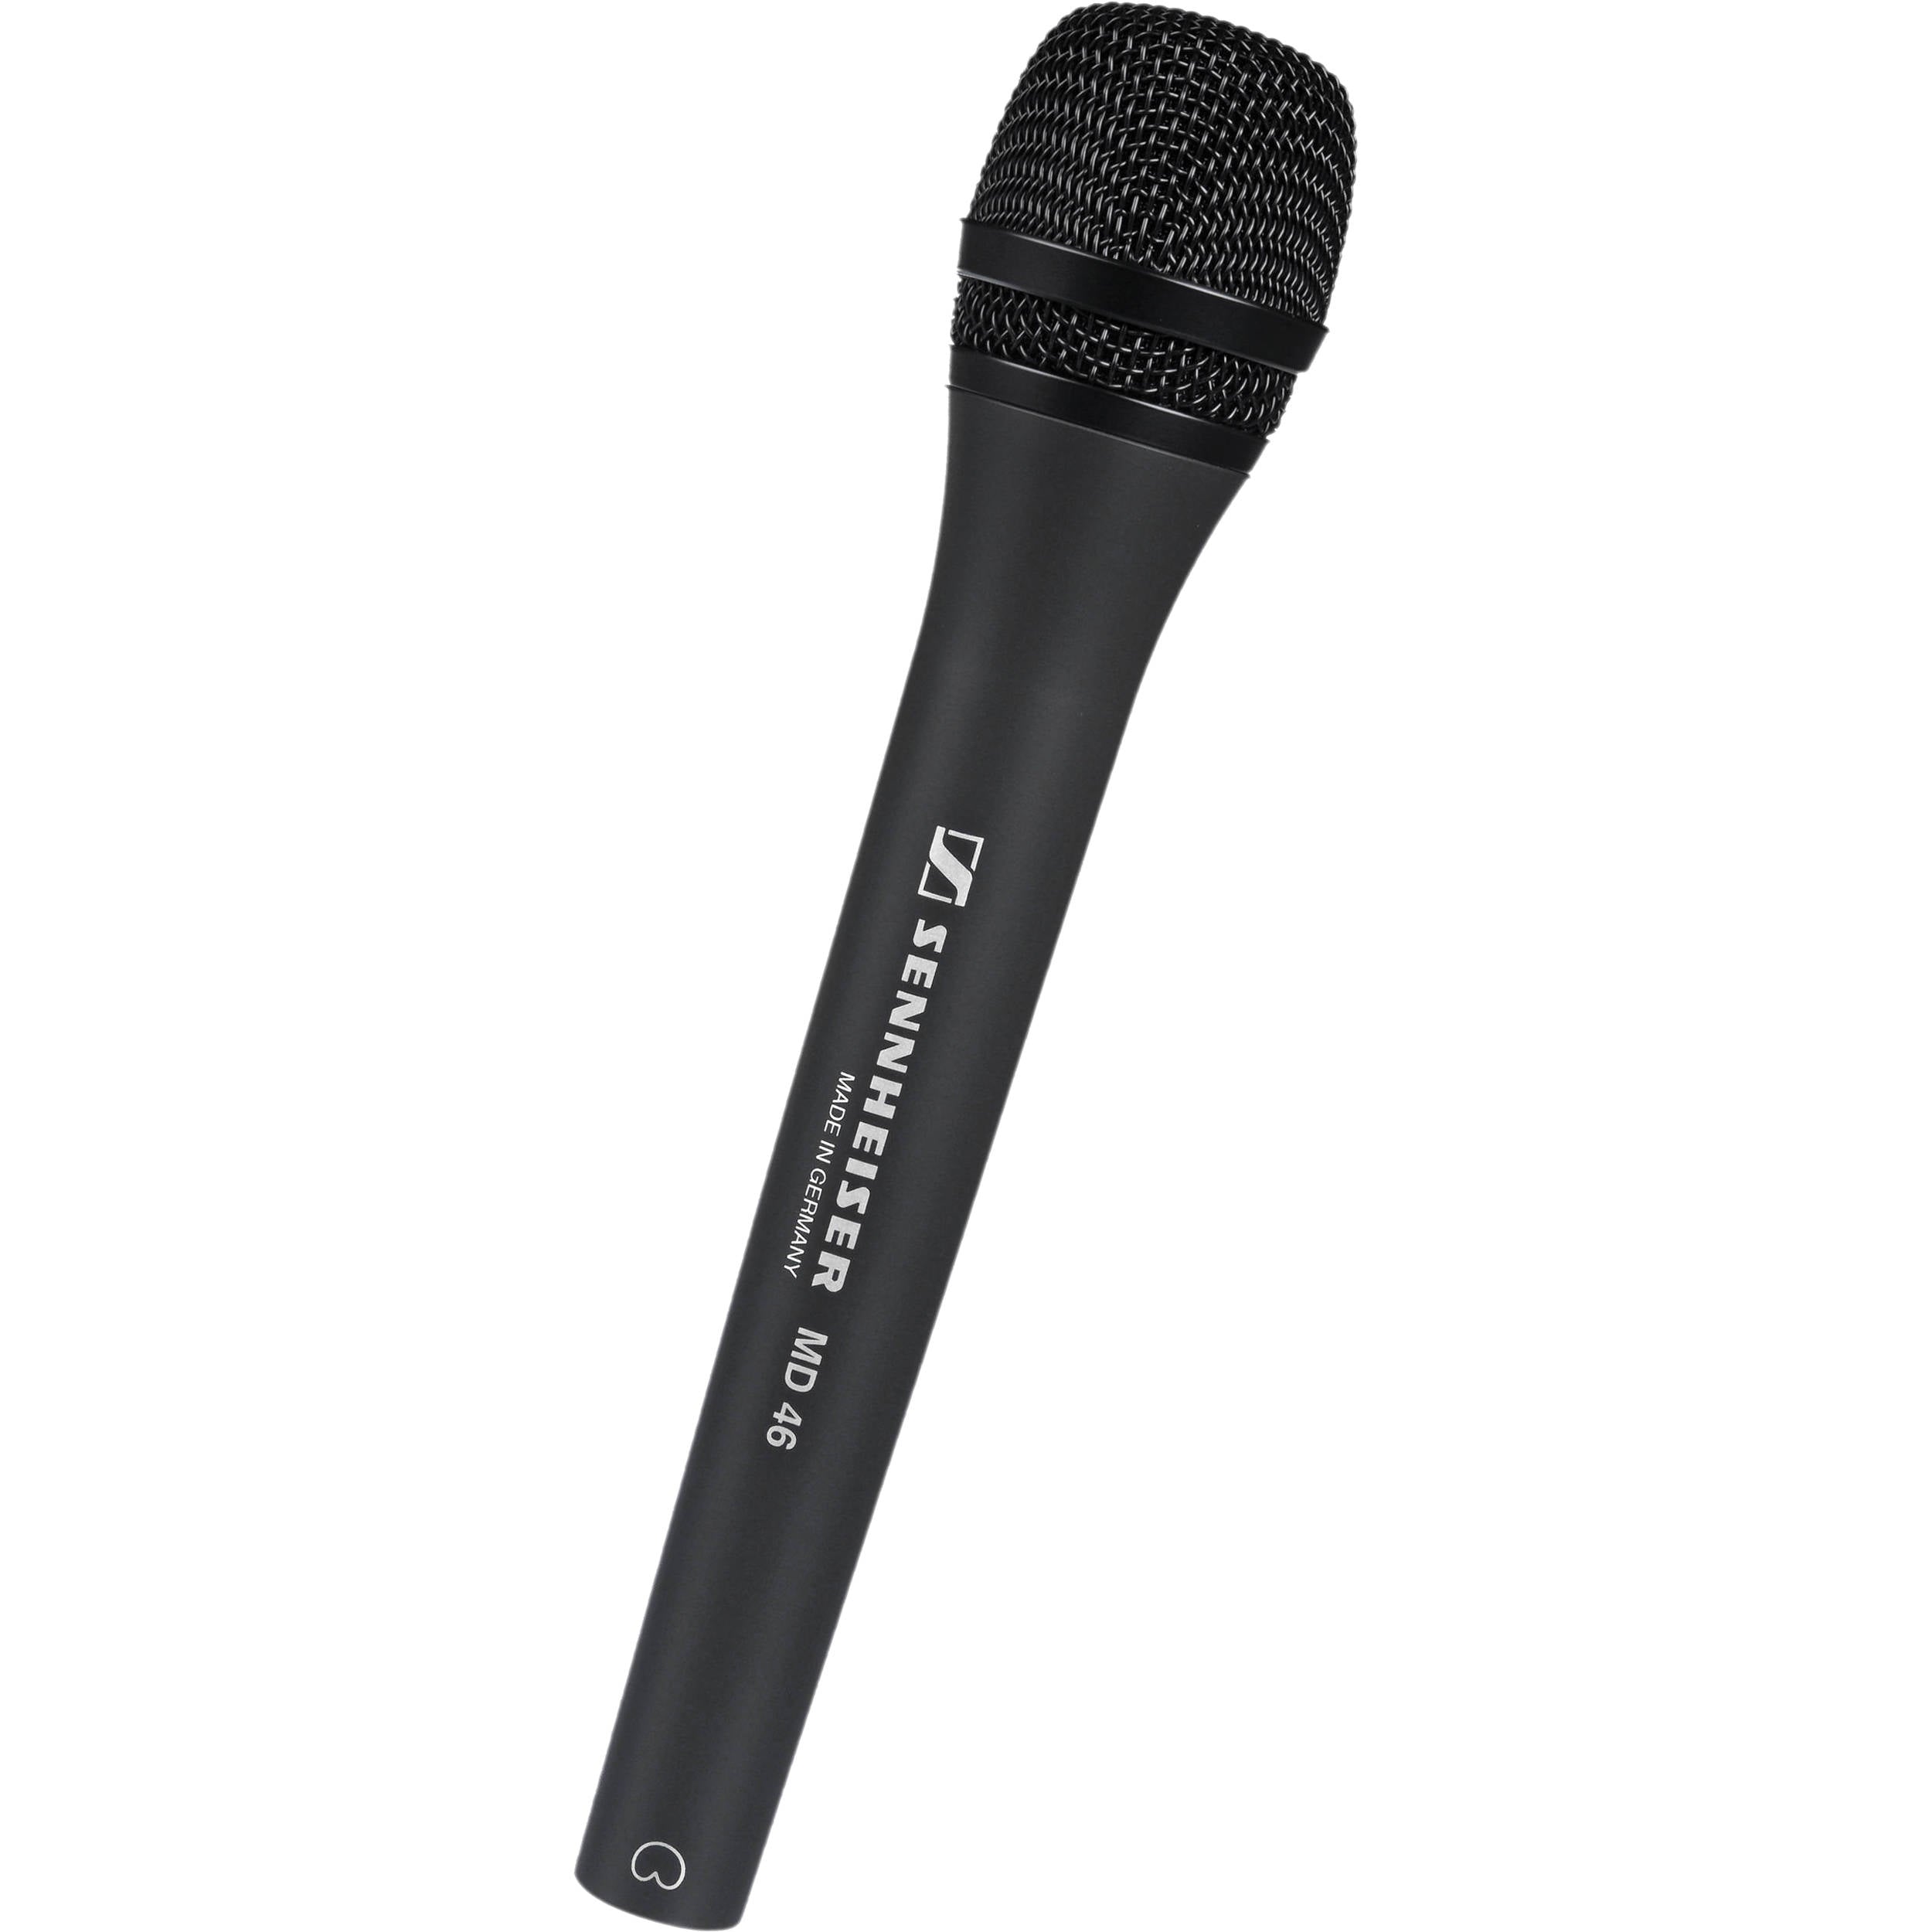 Sennheiser MD 46 Dynamic Microphone for Live Reporting and Broadcasting Environments 005172